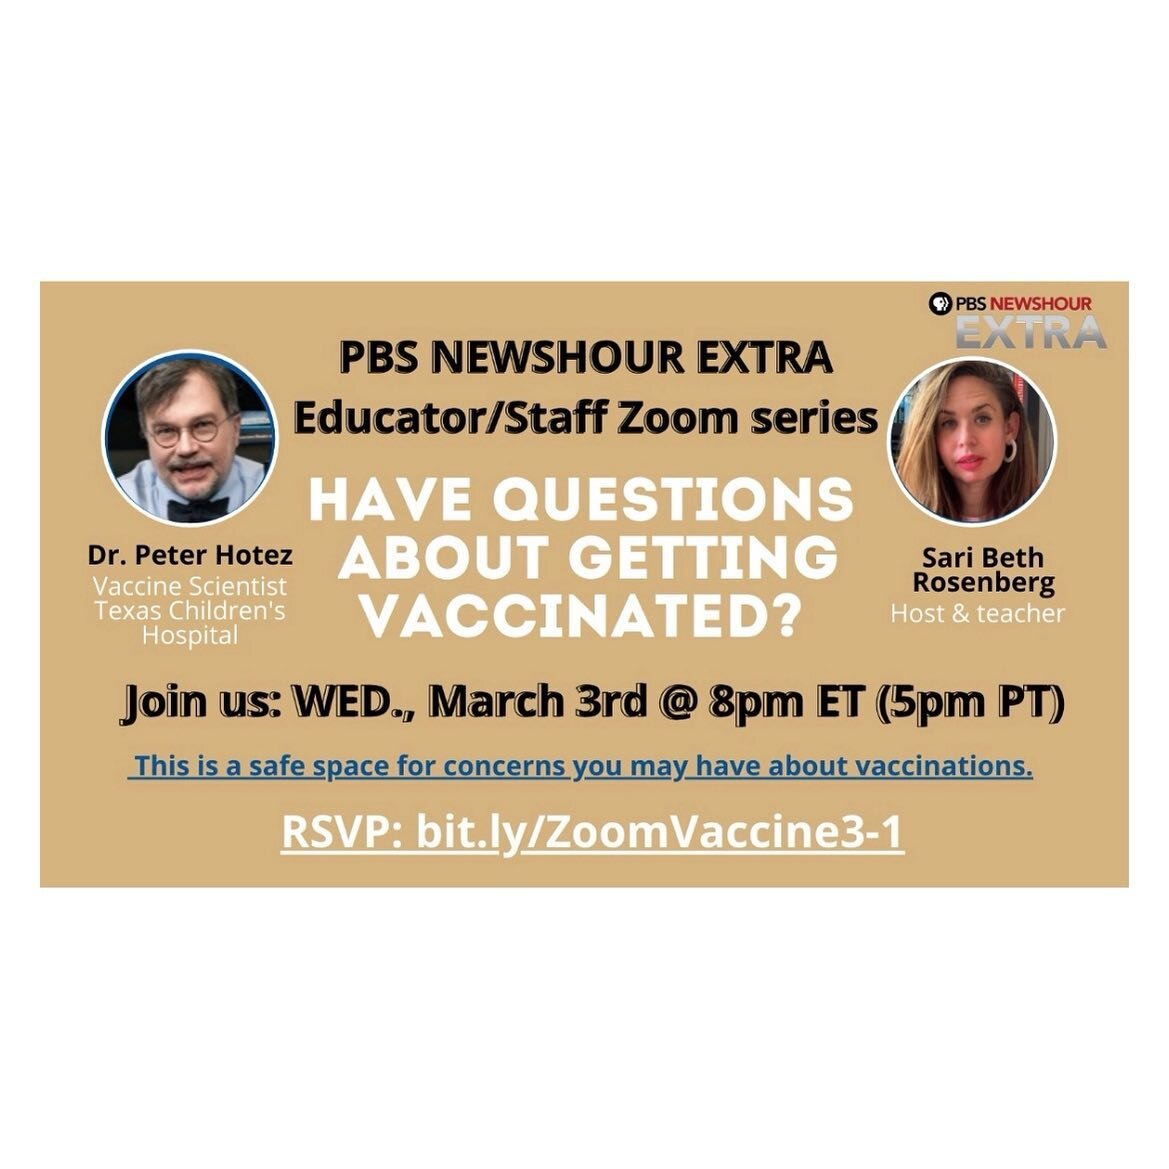 Join us tomorrow at 8pm ET with all your vaccine questions! 🔥 @PBS @newshourextra @newshour EXTRA Educator/Staff Zoom TOMORROW night at 8pm ET (5pm PT) w/ @PeterHotez and teacher-host @saribethrose

on *Getting Vaccinated*

RSVP: bit.ly/ZoomVaccine3